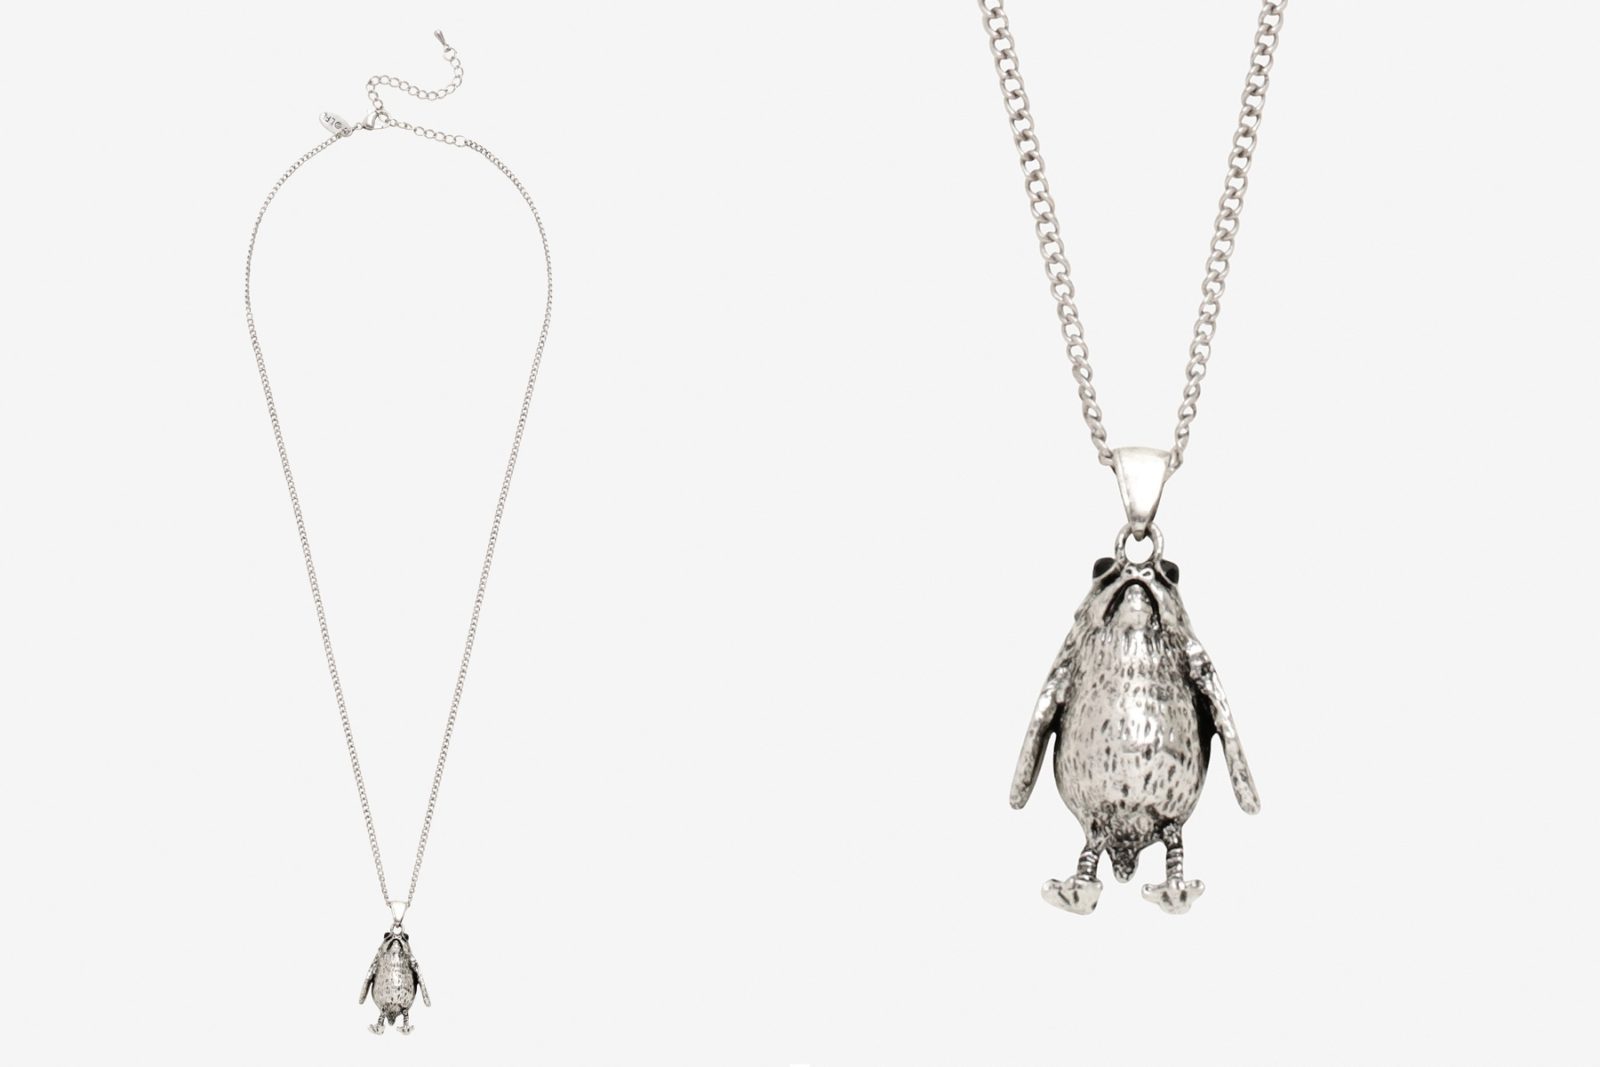 The Last Jedi Porg Necklace at Hot Topic